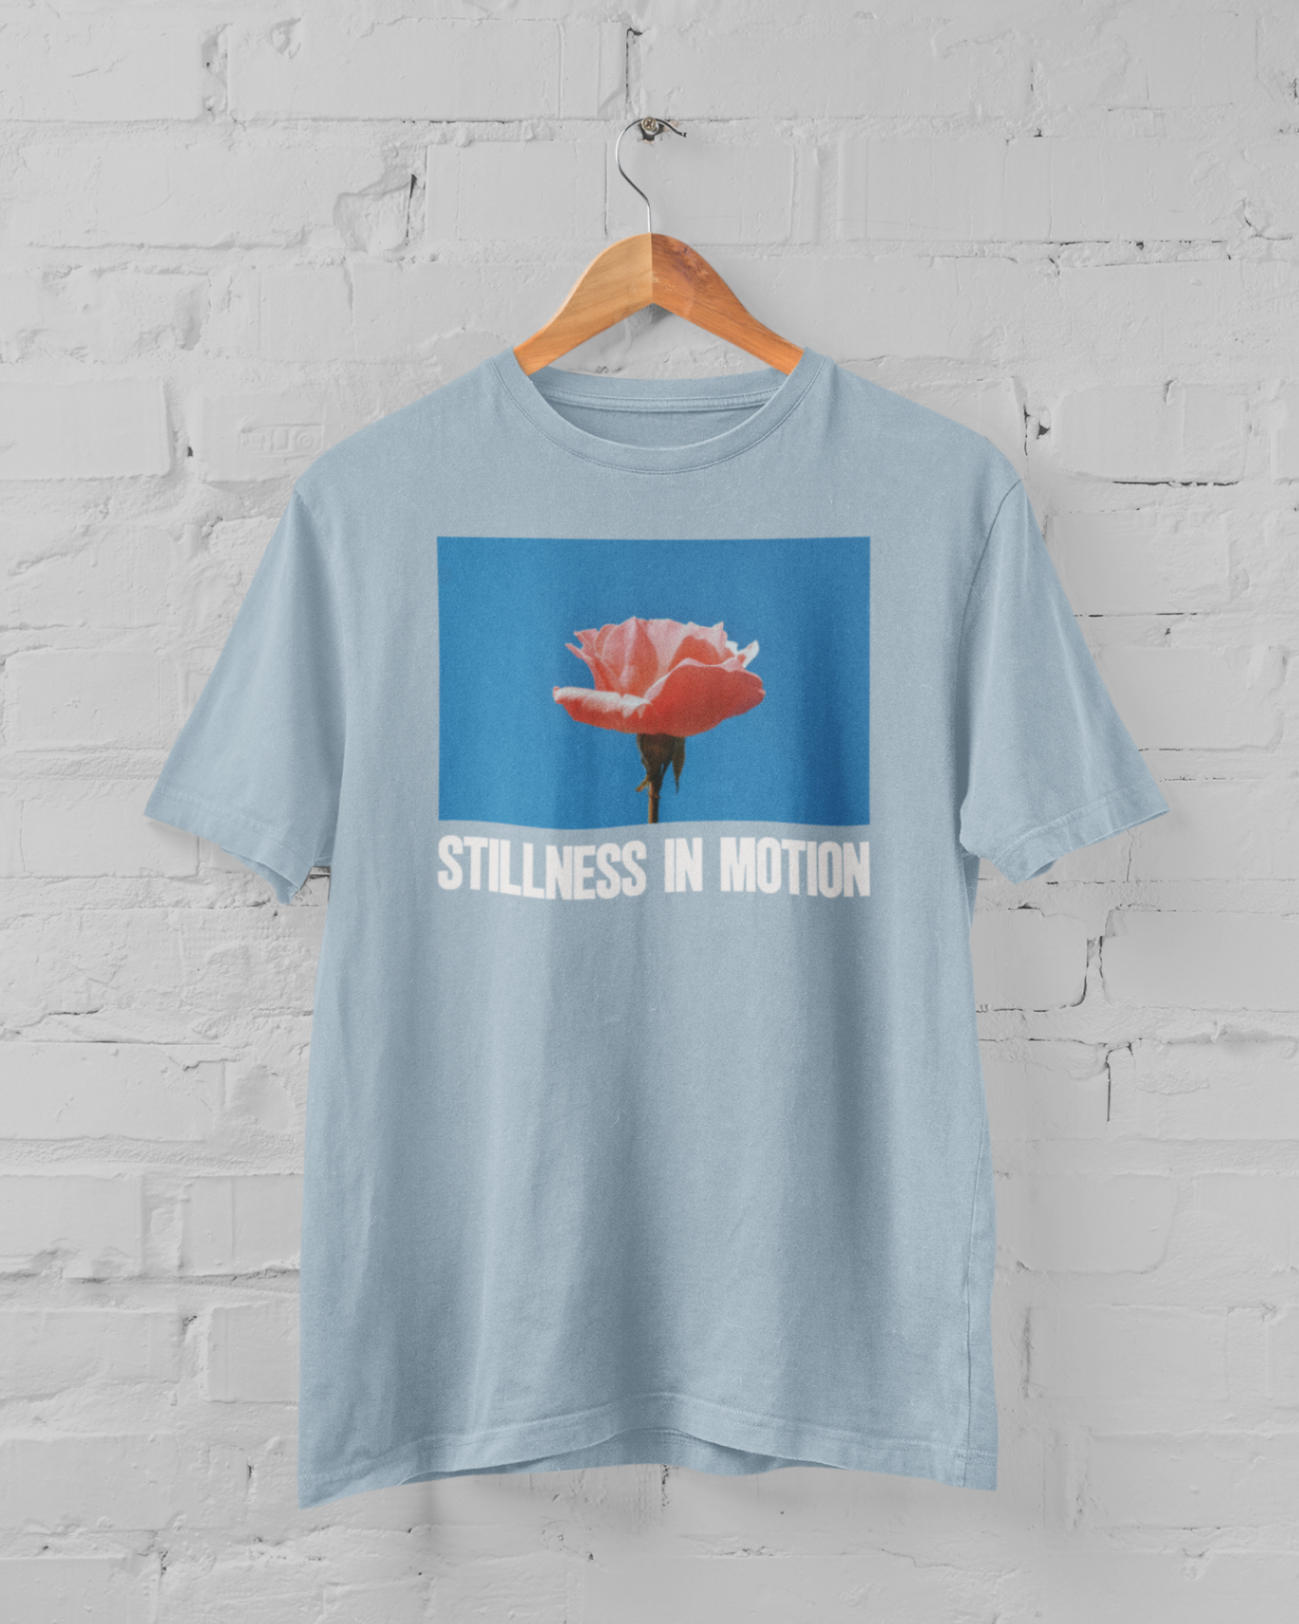 a light blue tshirt with stillness in motion written in text under a pink flower over a sky blue backround